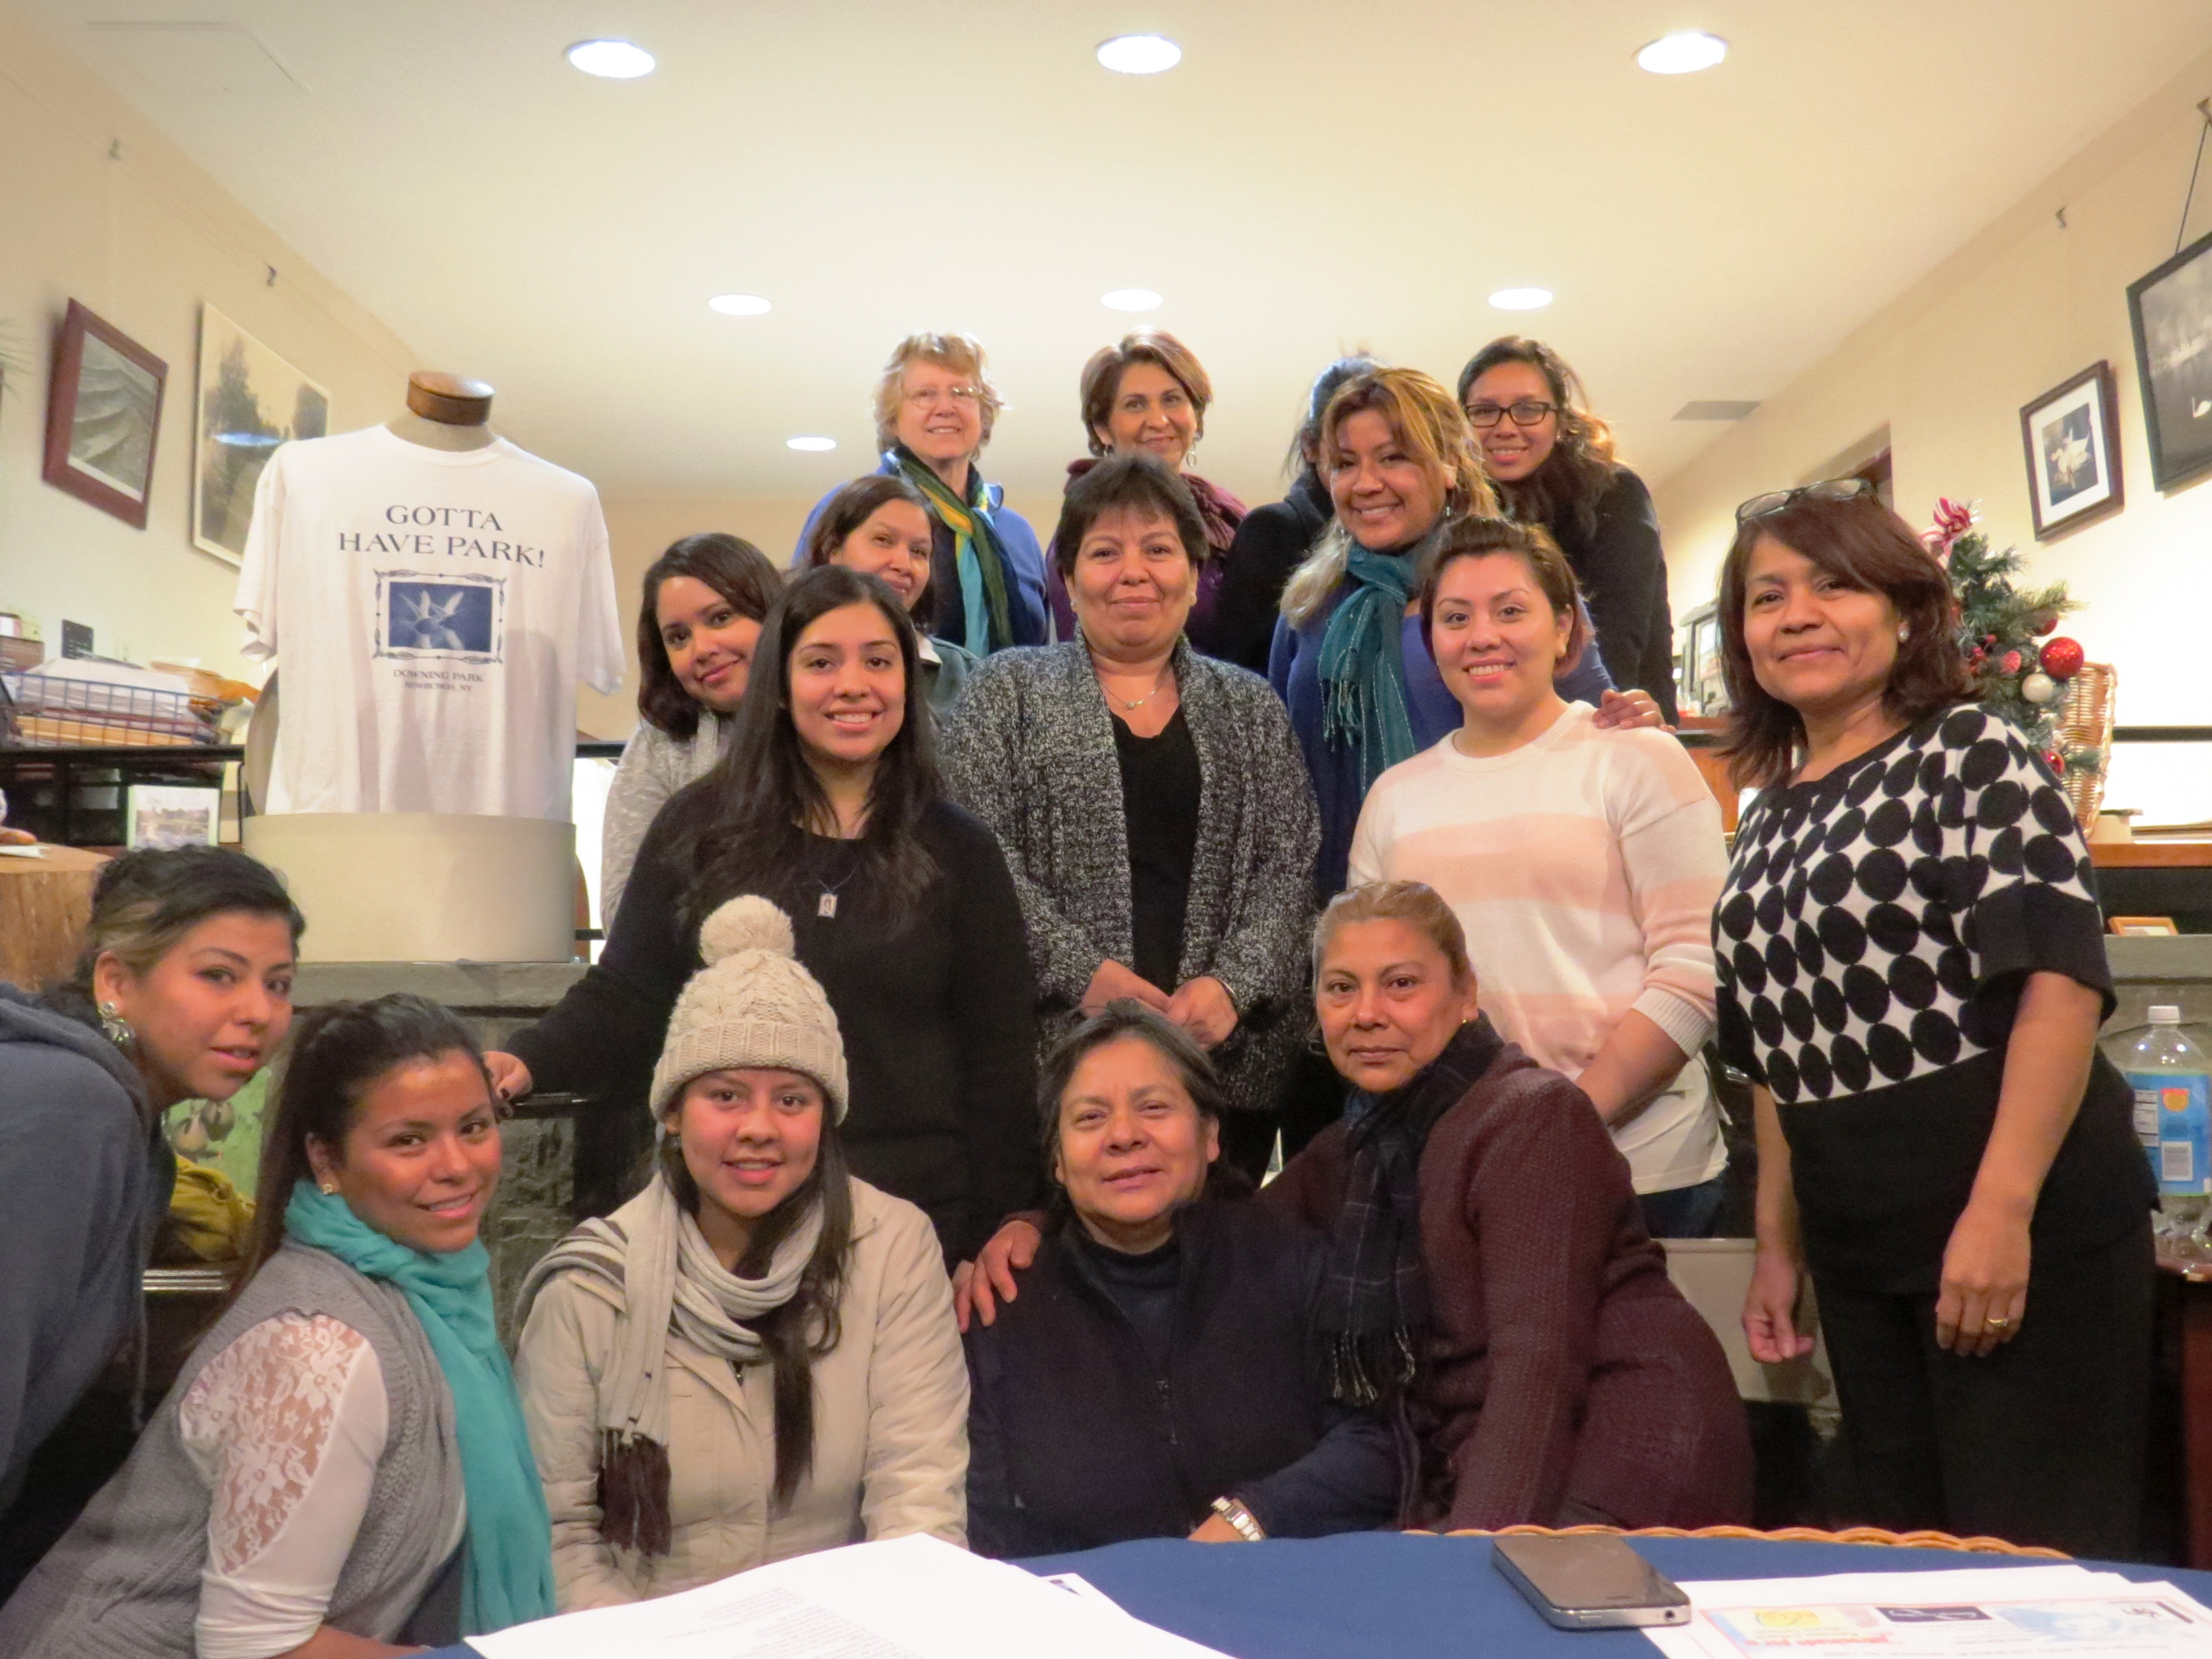  Women who attended the first meeting of the Hudson Valley Latina Women Group. Double this amount attended their second meeting!